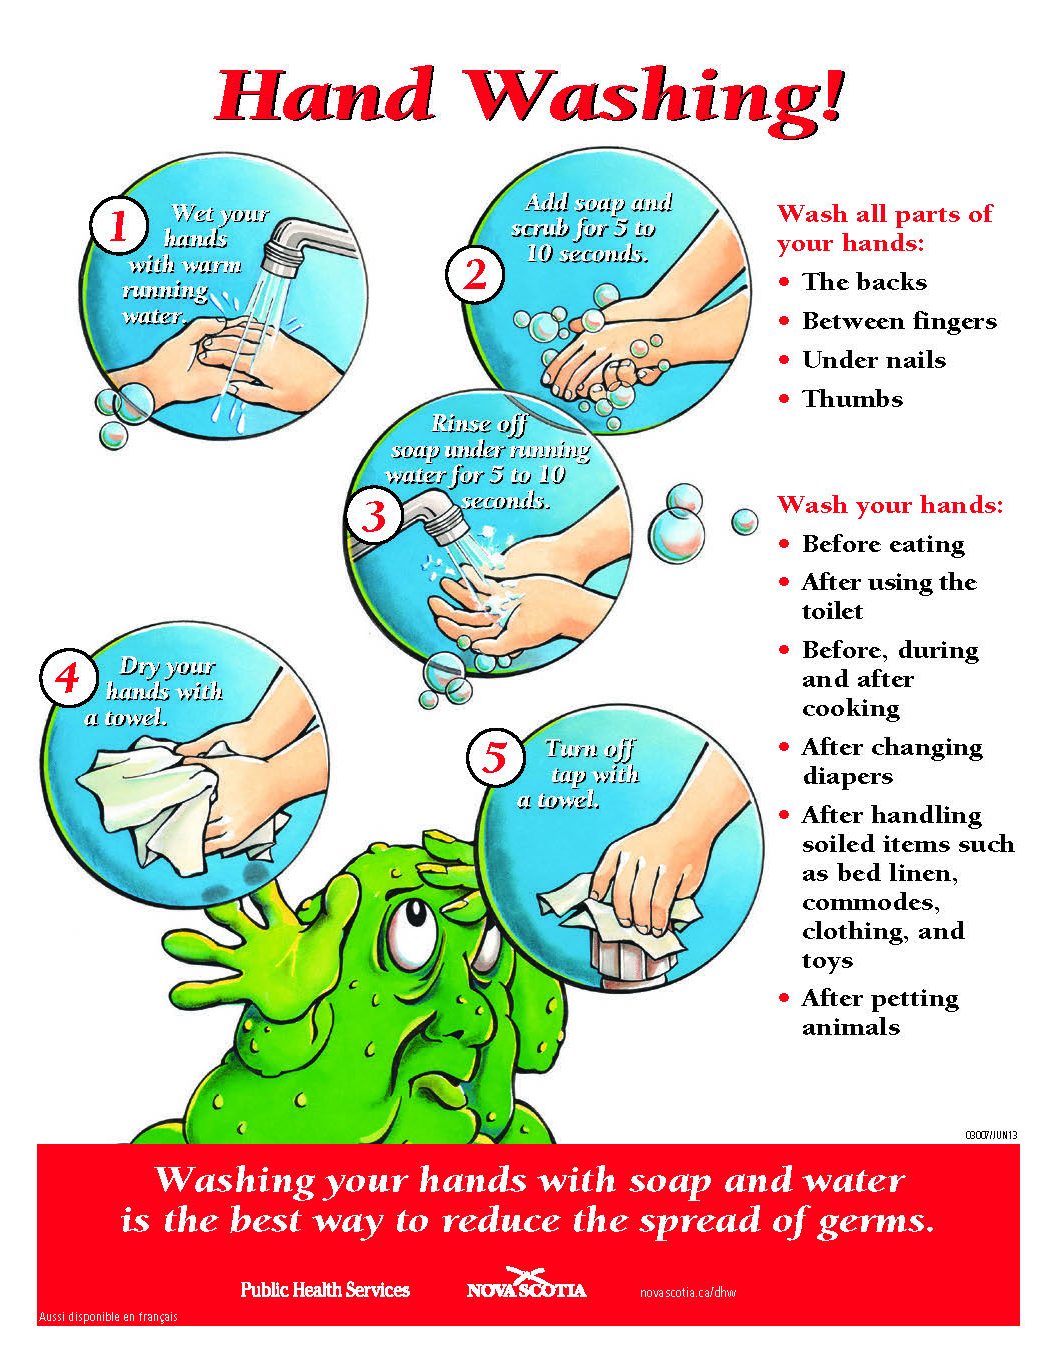 Wash hands with running water, add soap and scrub for 5 to 10 seconds, rinse off soap, dry hands with a towel, turn off tap with a towel.